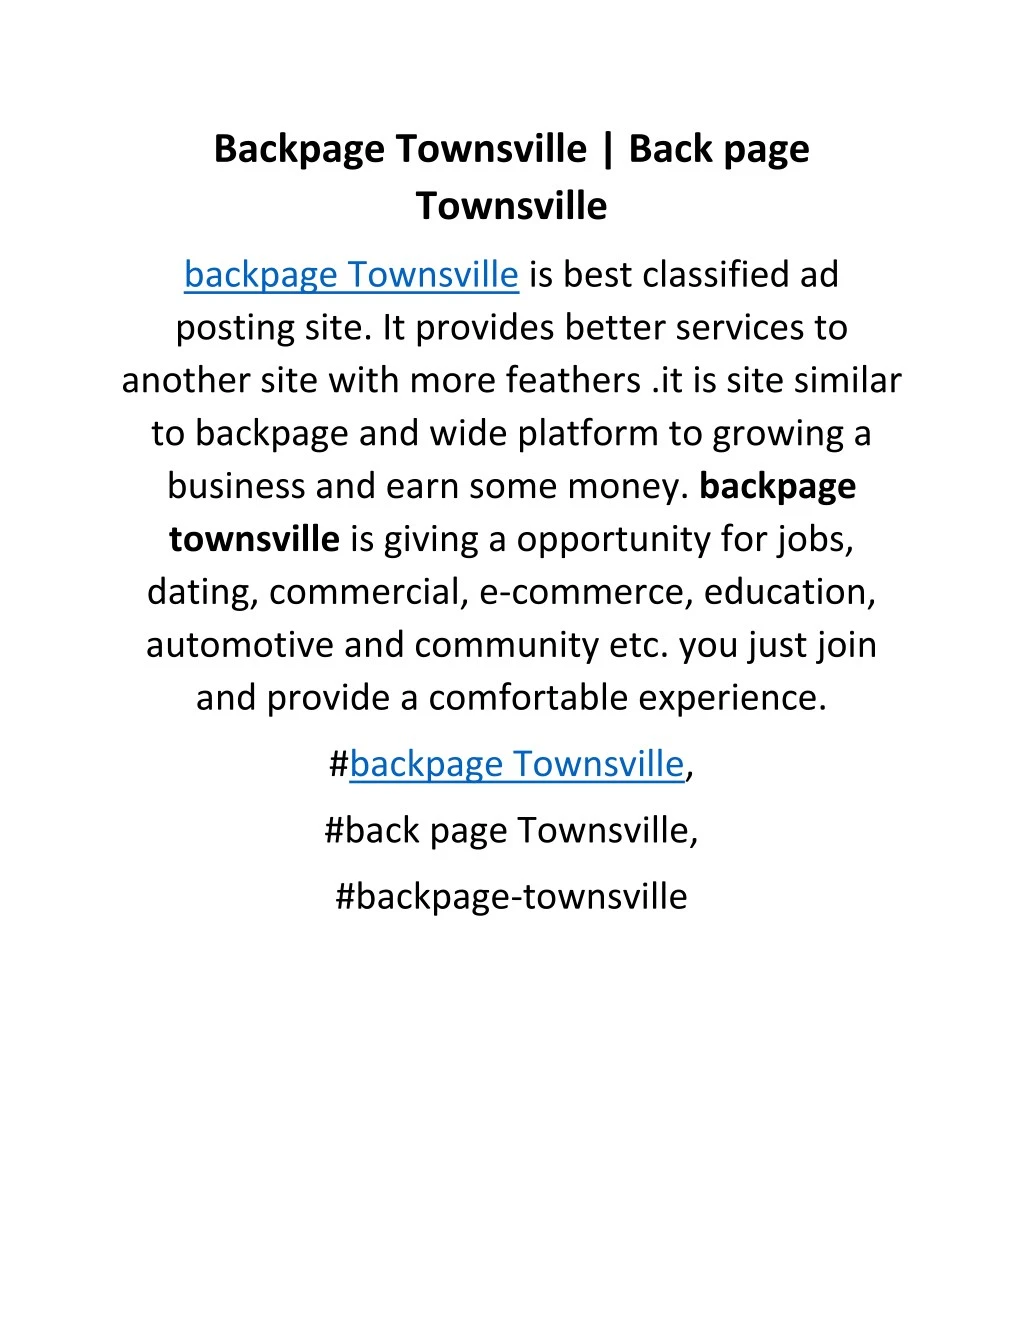 backpage townsville back page townsville